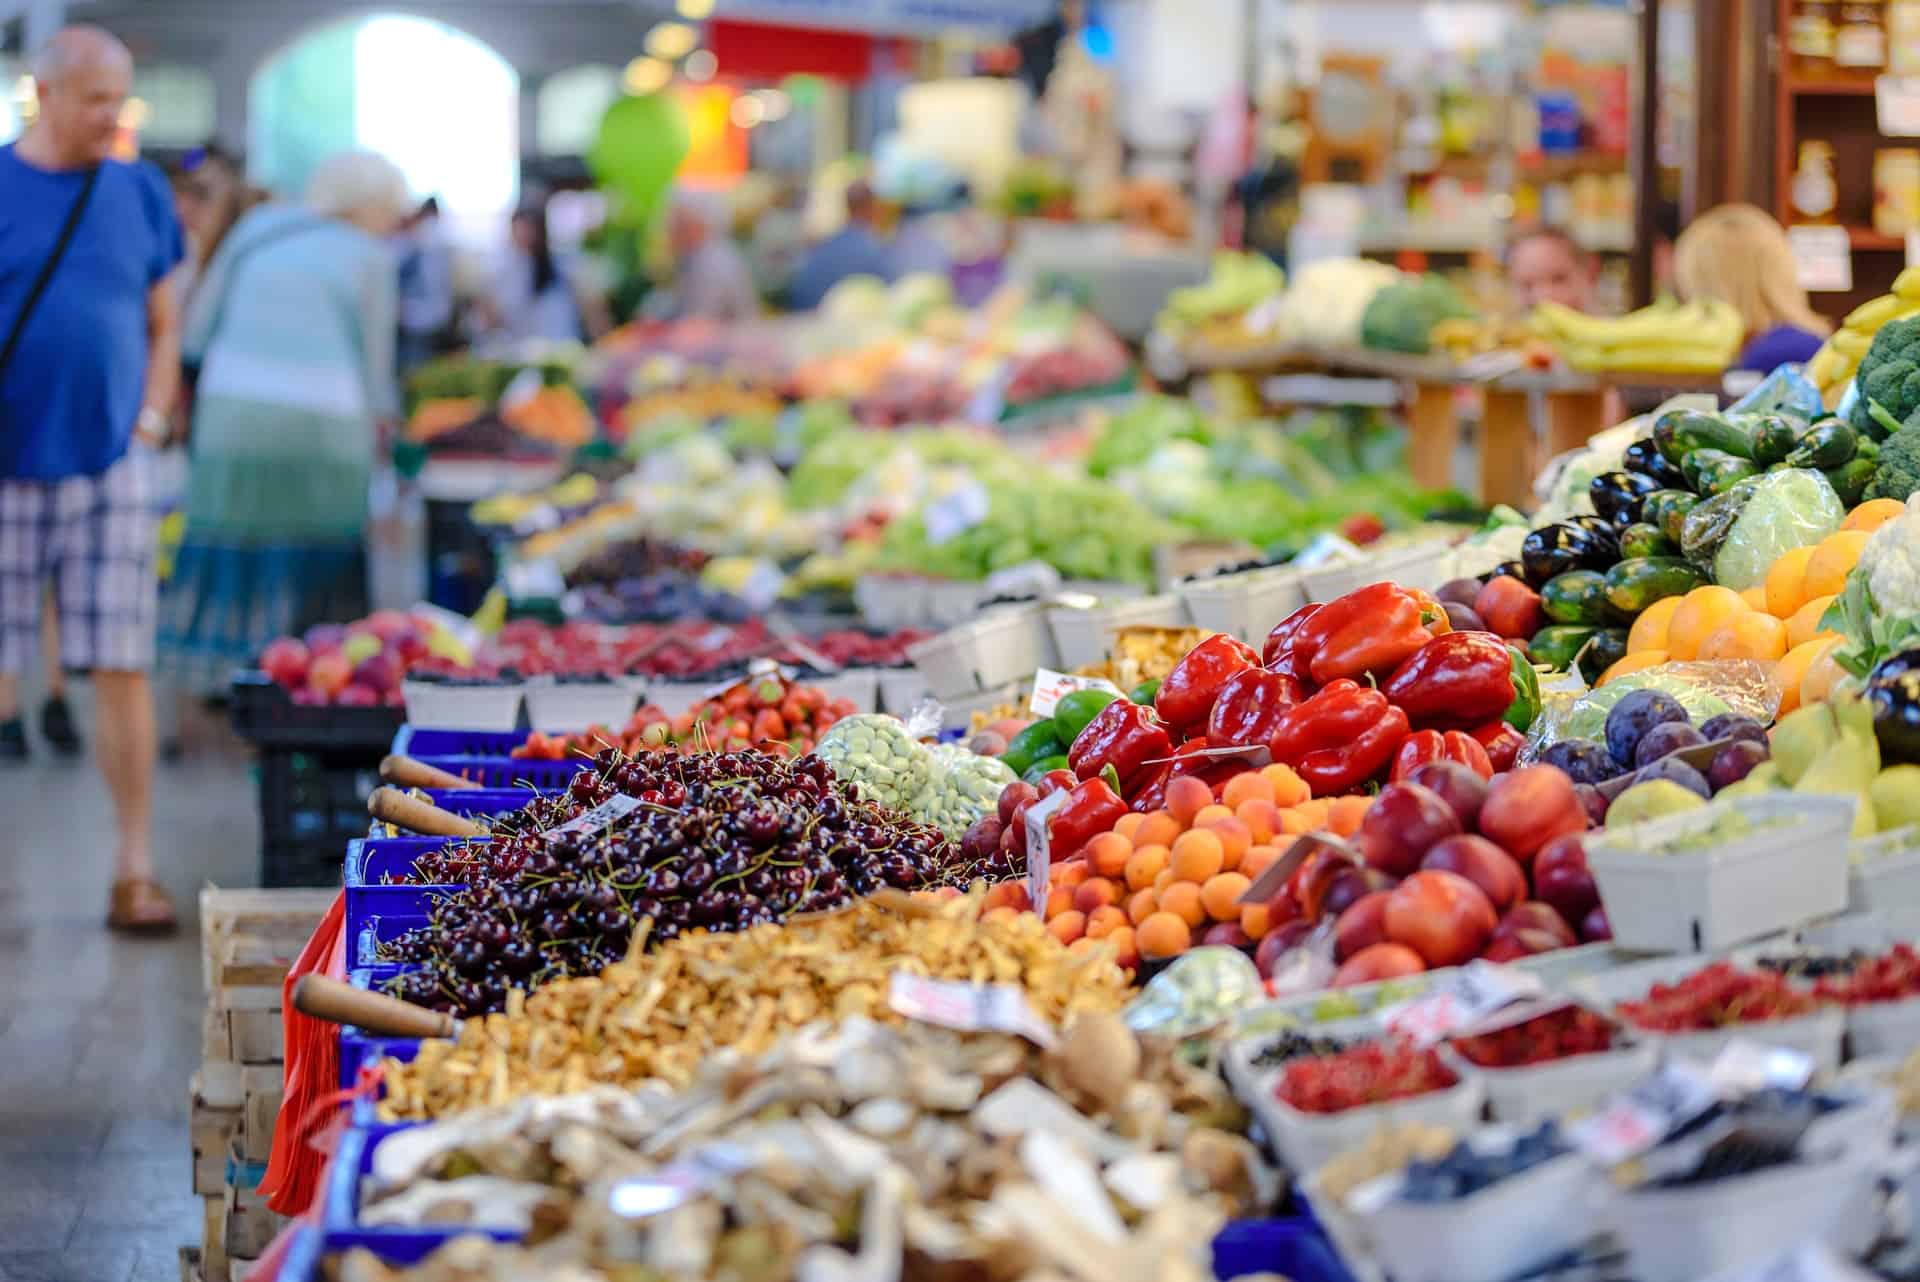 A market with fresh fruits and vegetables